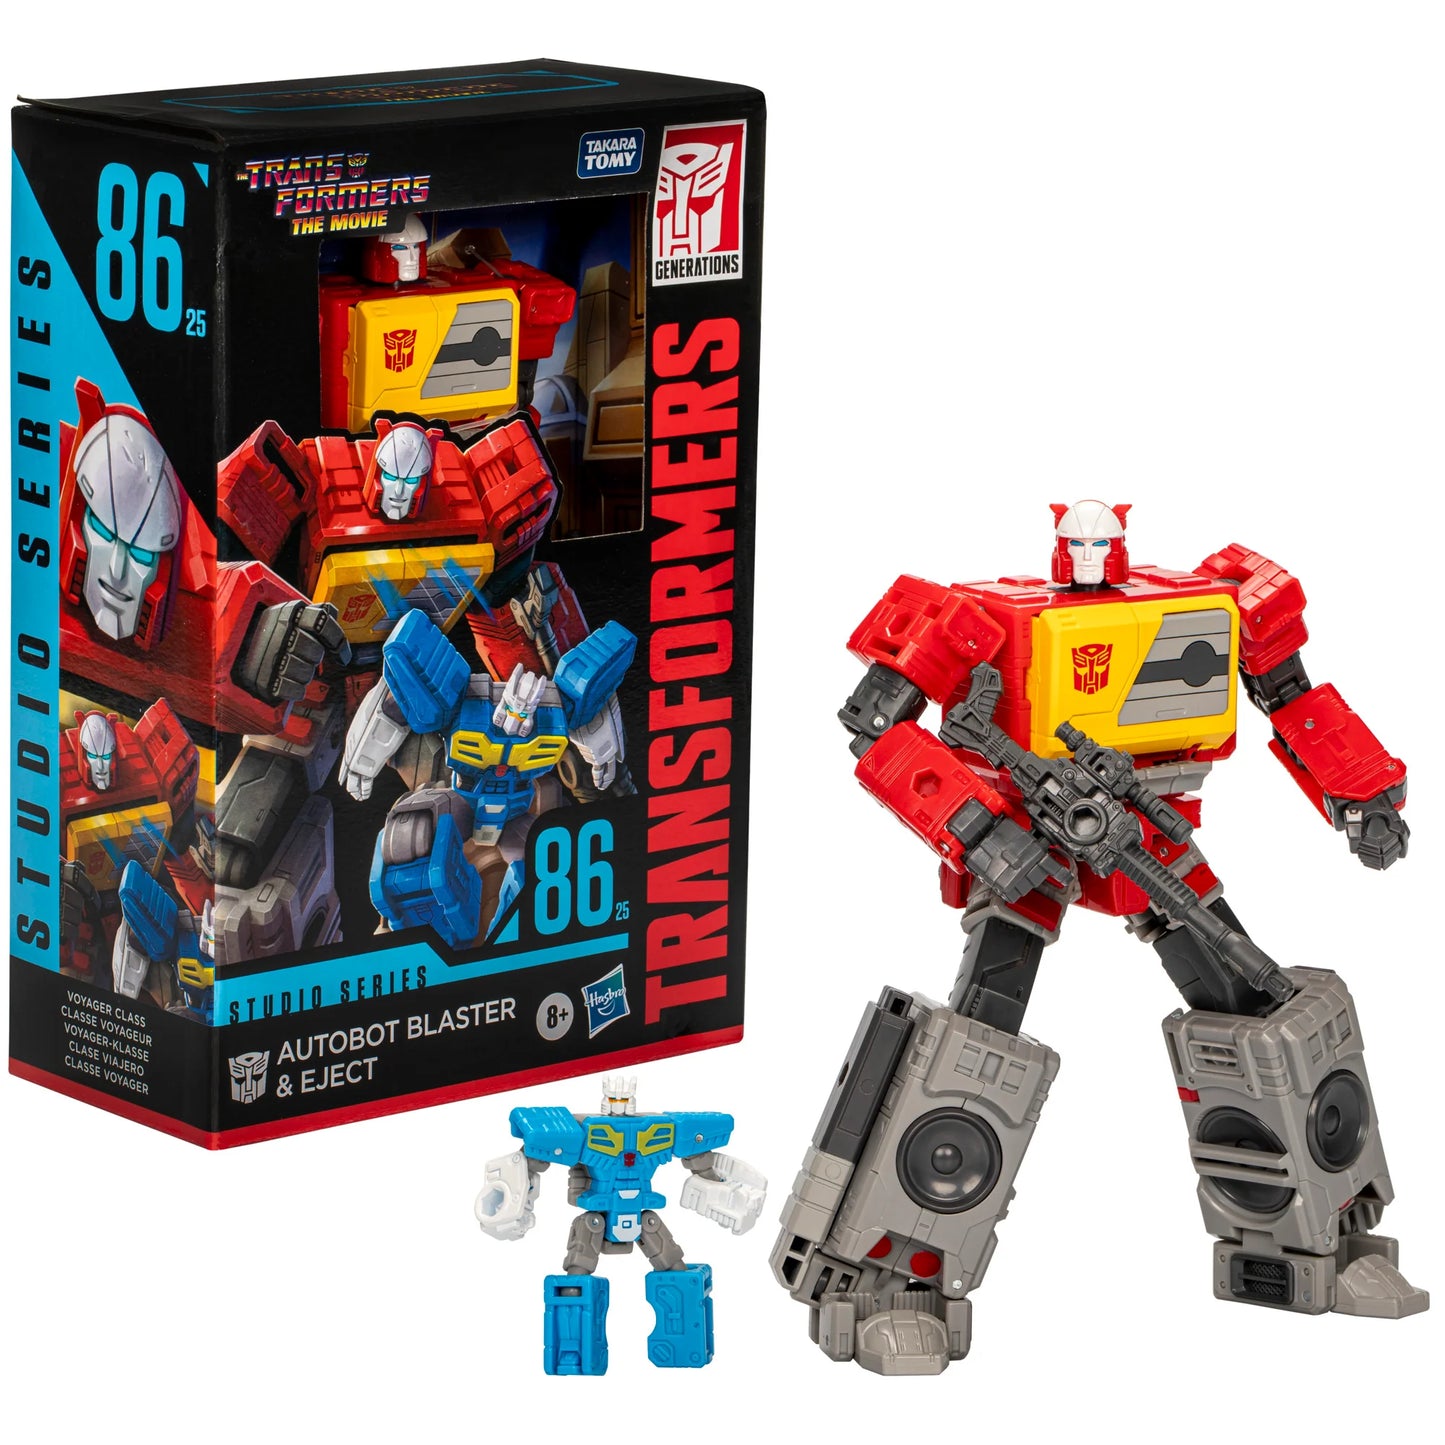 Transformers Studio Series Voyager The Transformers: The Movie 86-25 Autobot Blaster & Eject